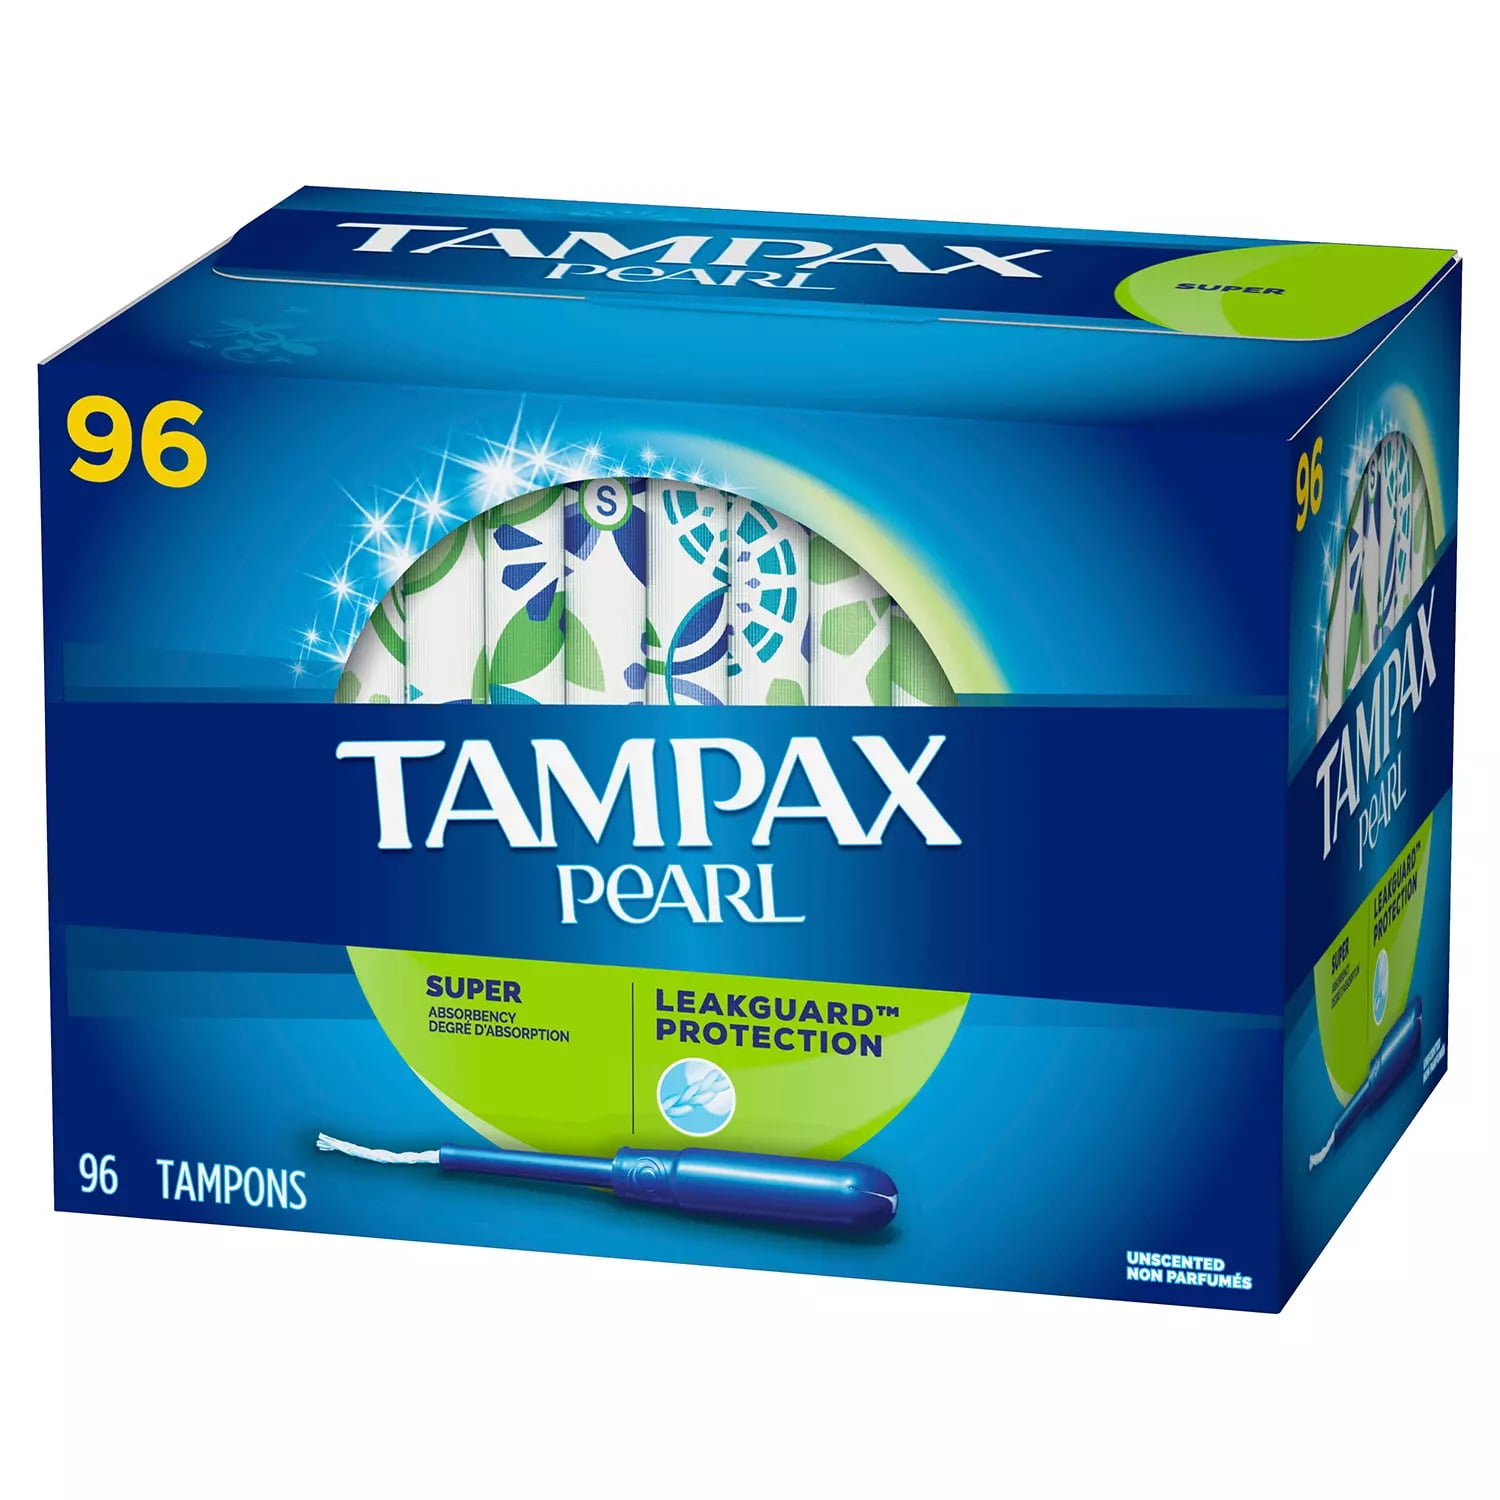 Tampons for the Women's Restroom, Tampax, 500/cs - Parish Supply